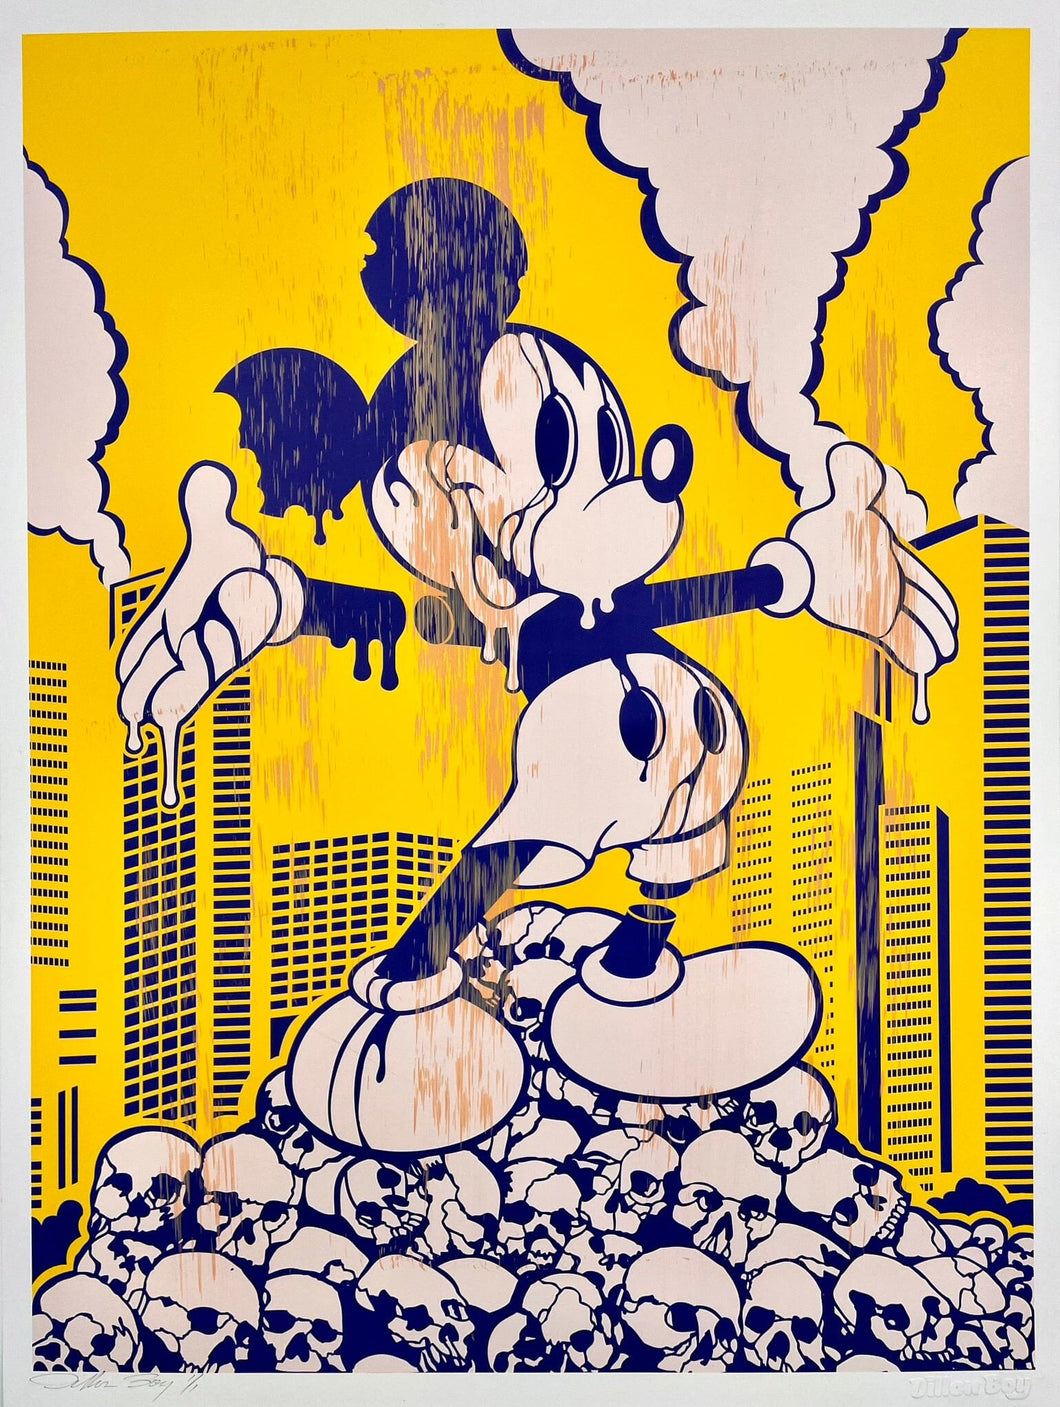 Corporations Kill - Mickey Mouse Print - Hand Embellished Dillon Boy